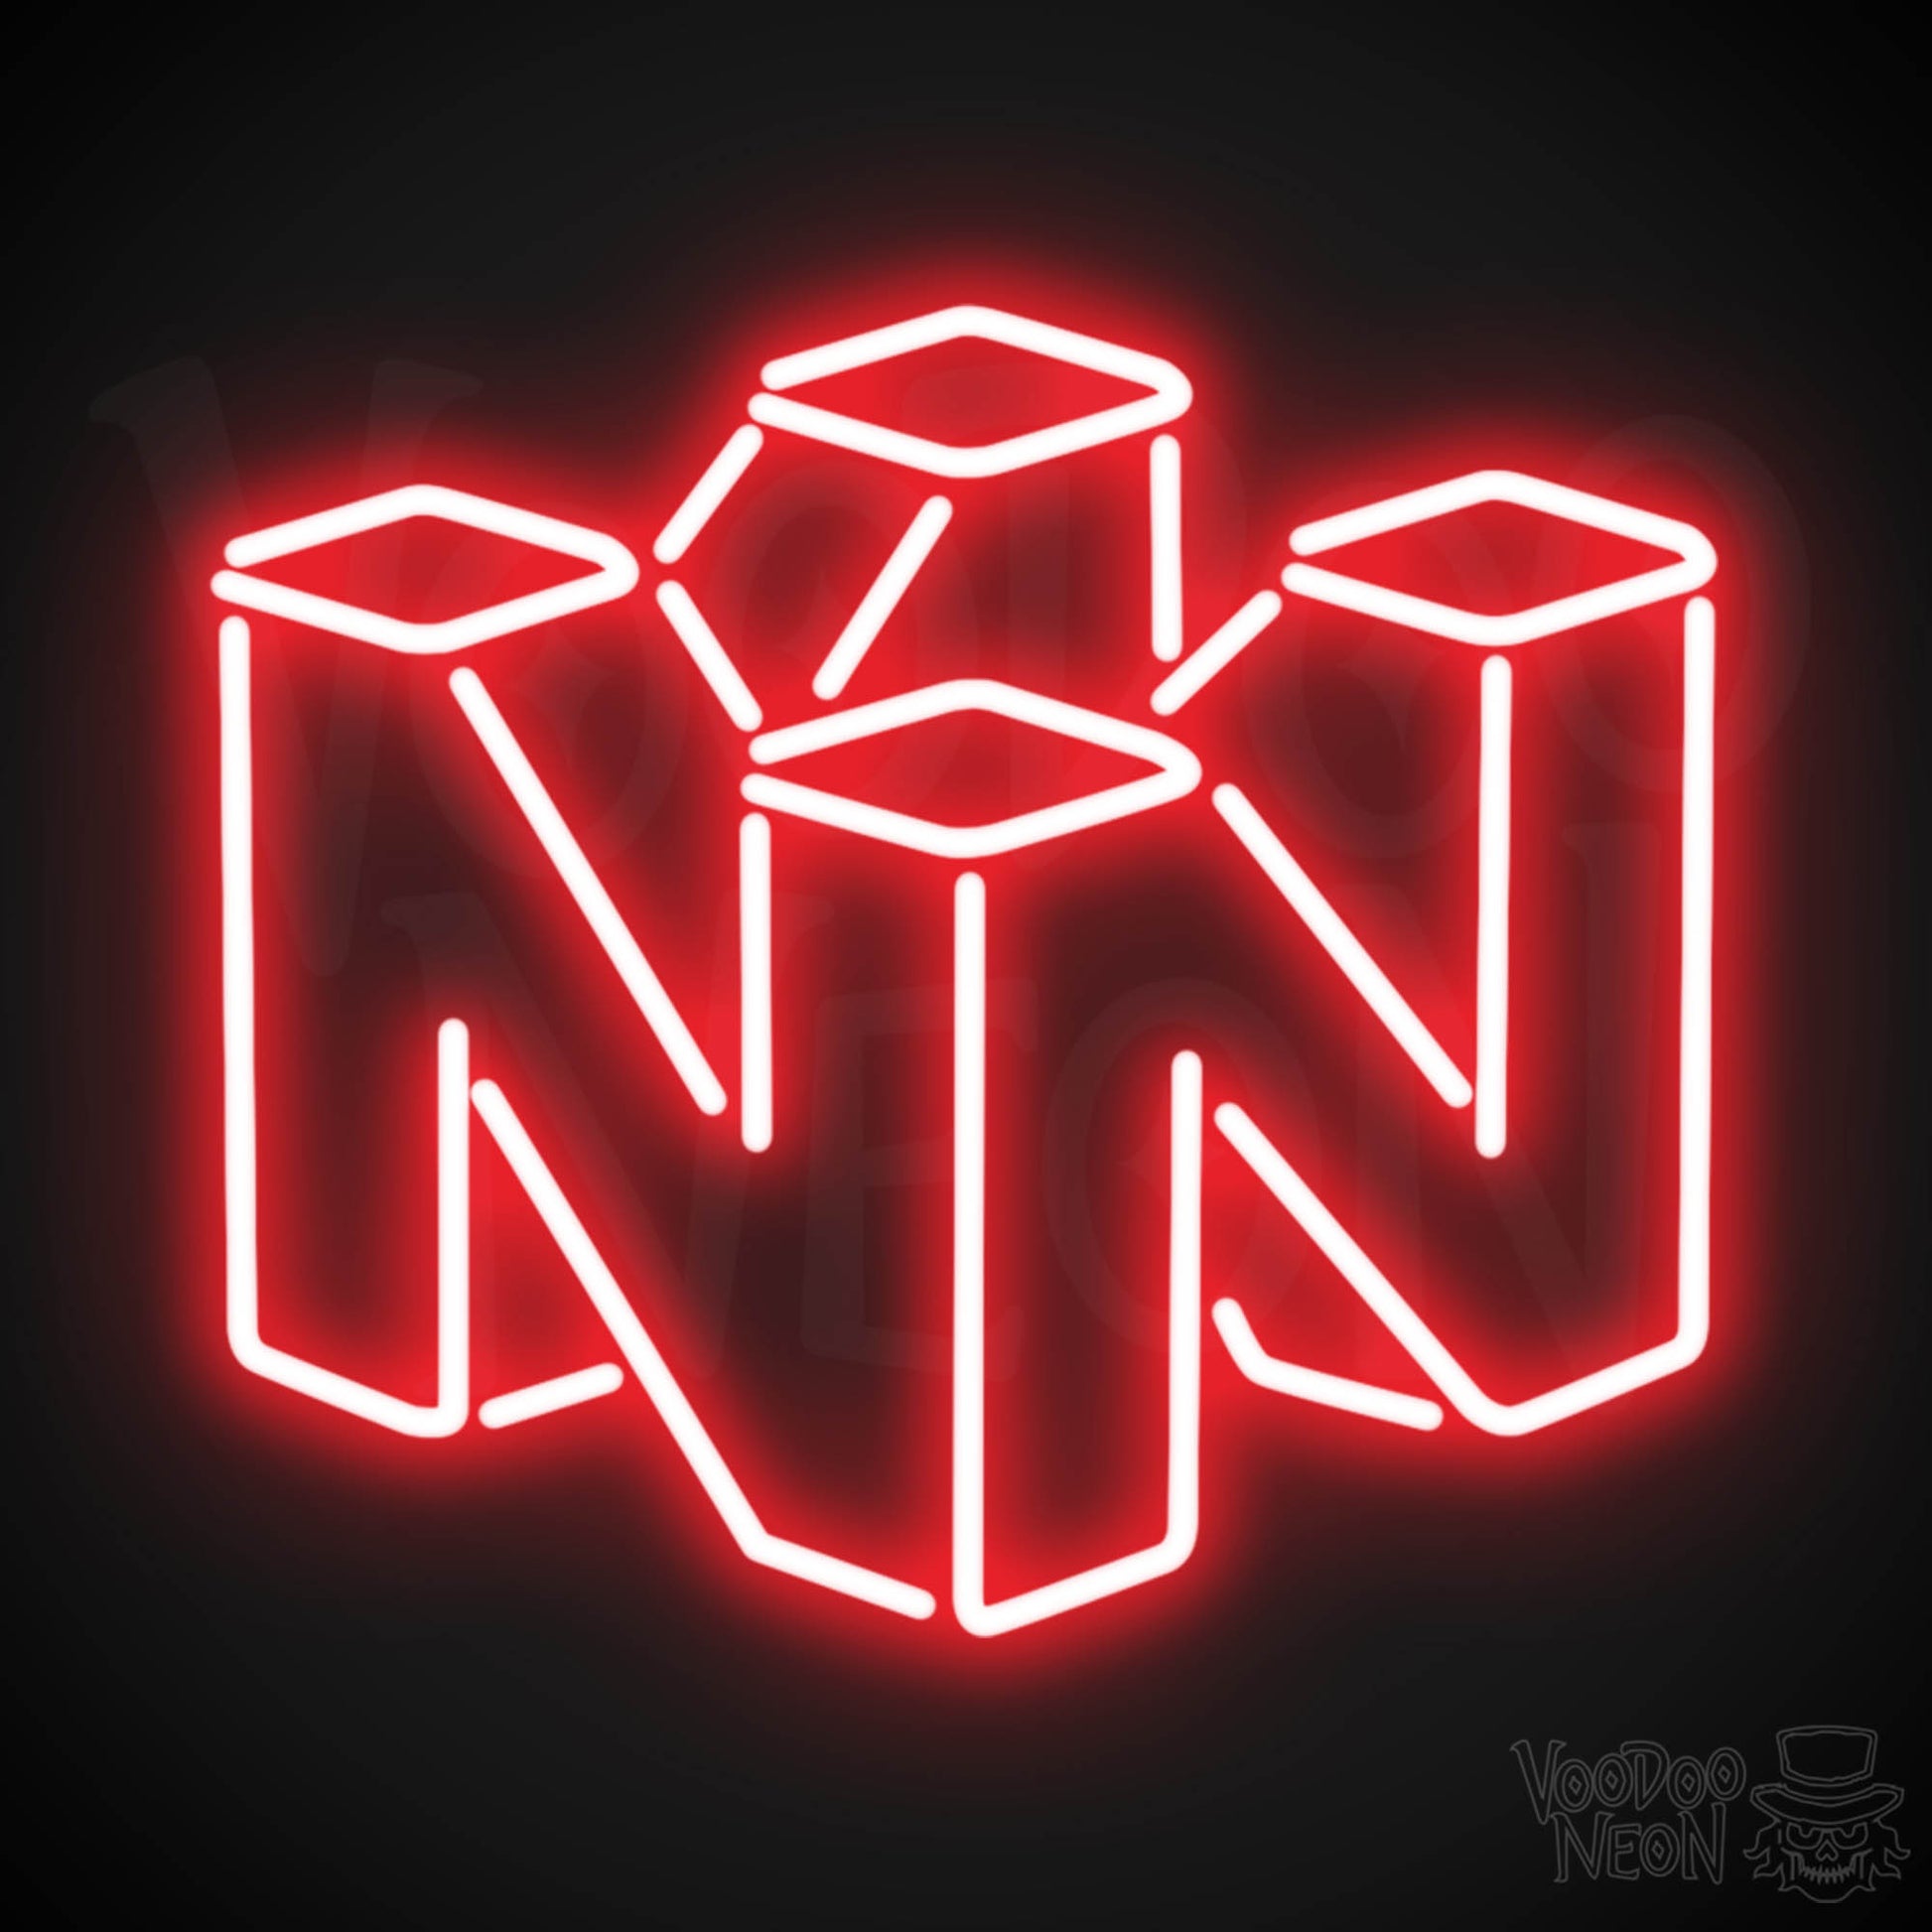 Nintendo Neon Sign - Neon Nintendo Sign - Nintendo Logo Wall Art - Color Red